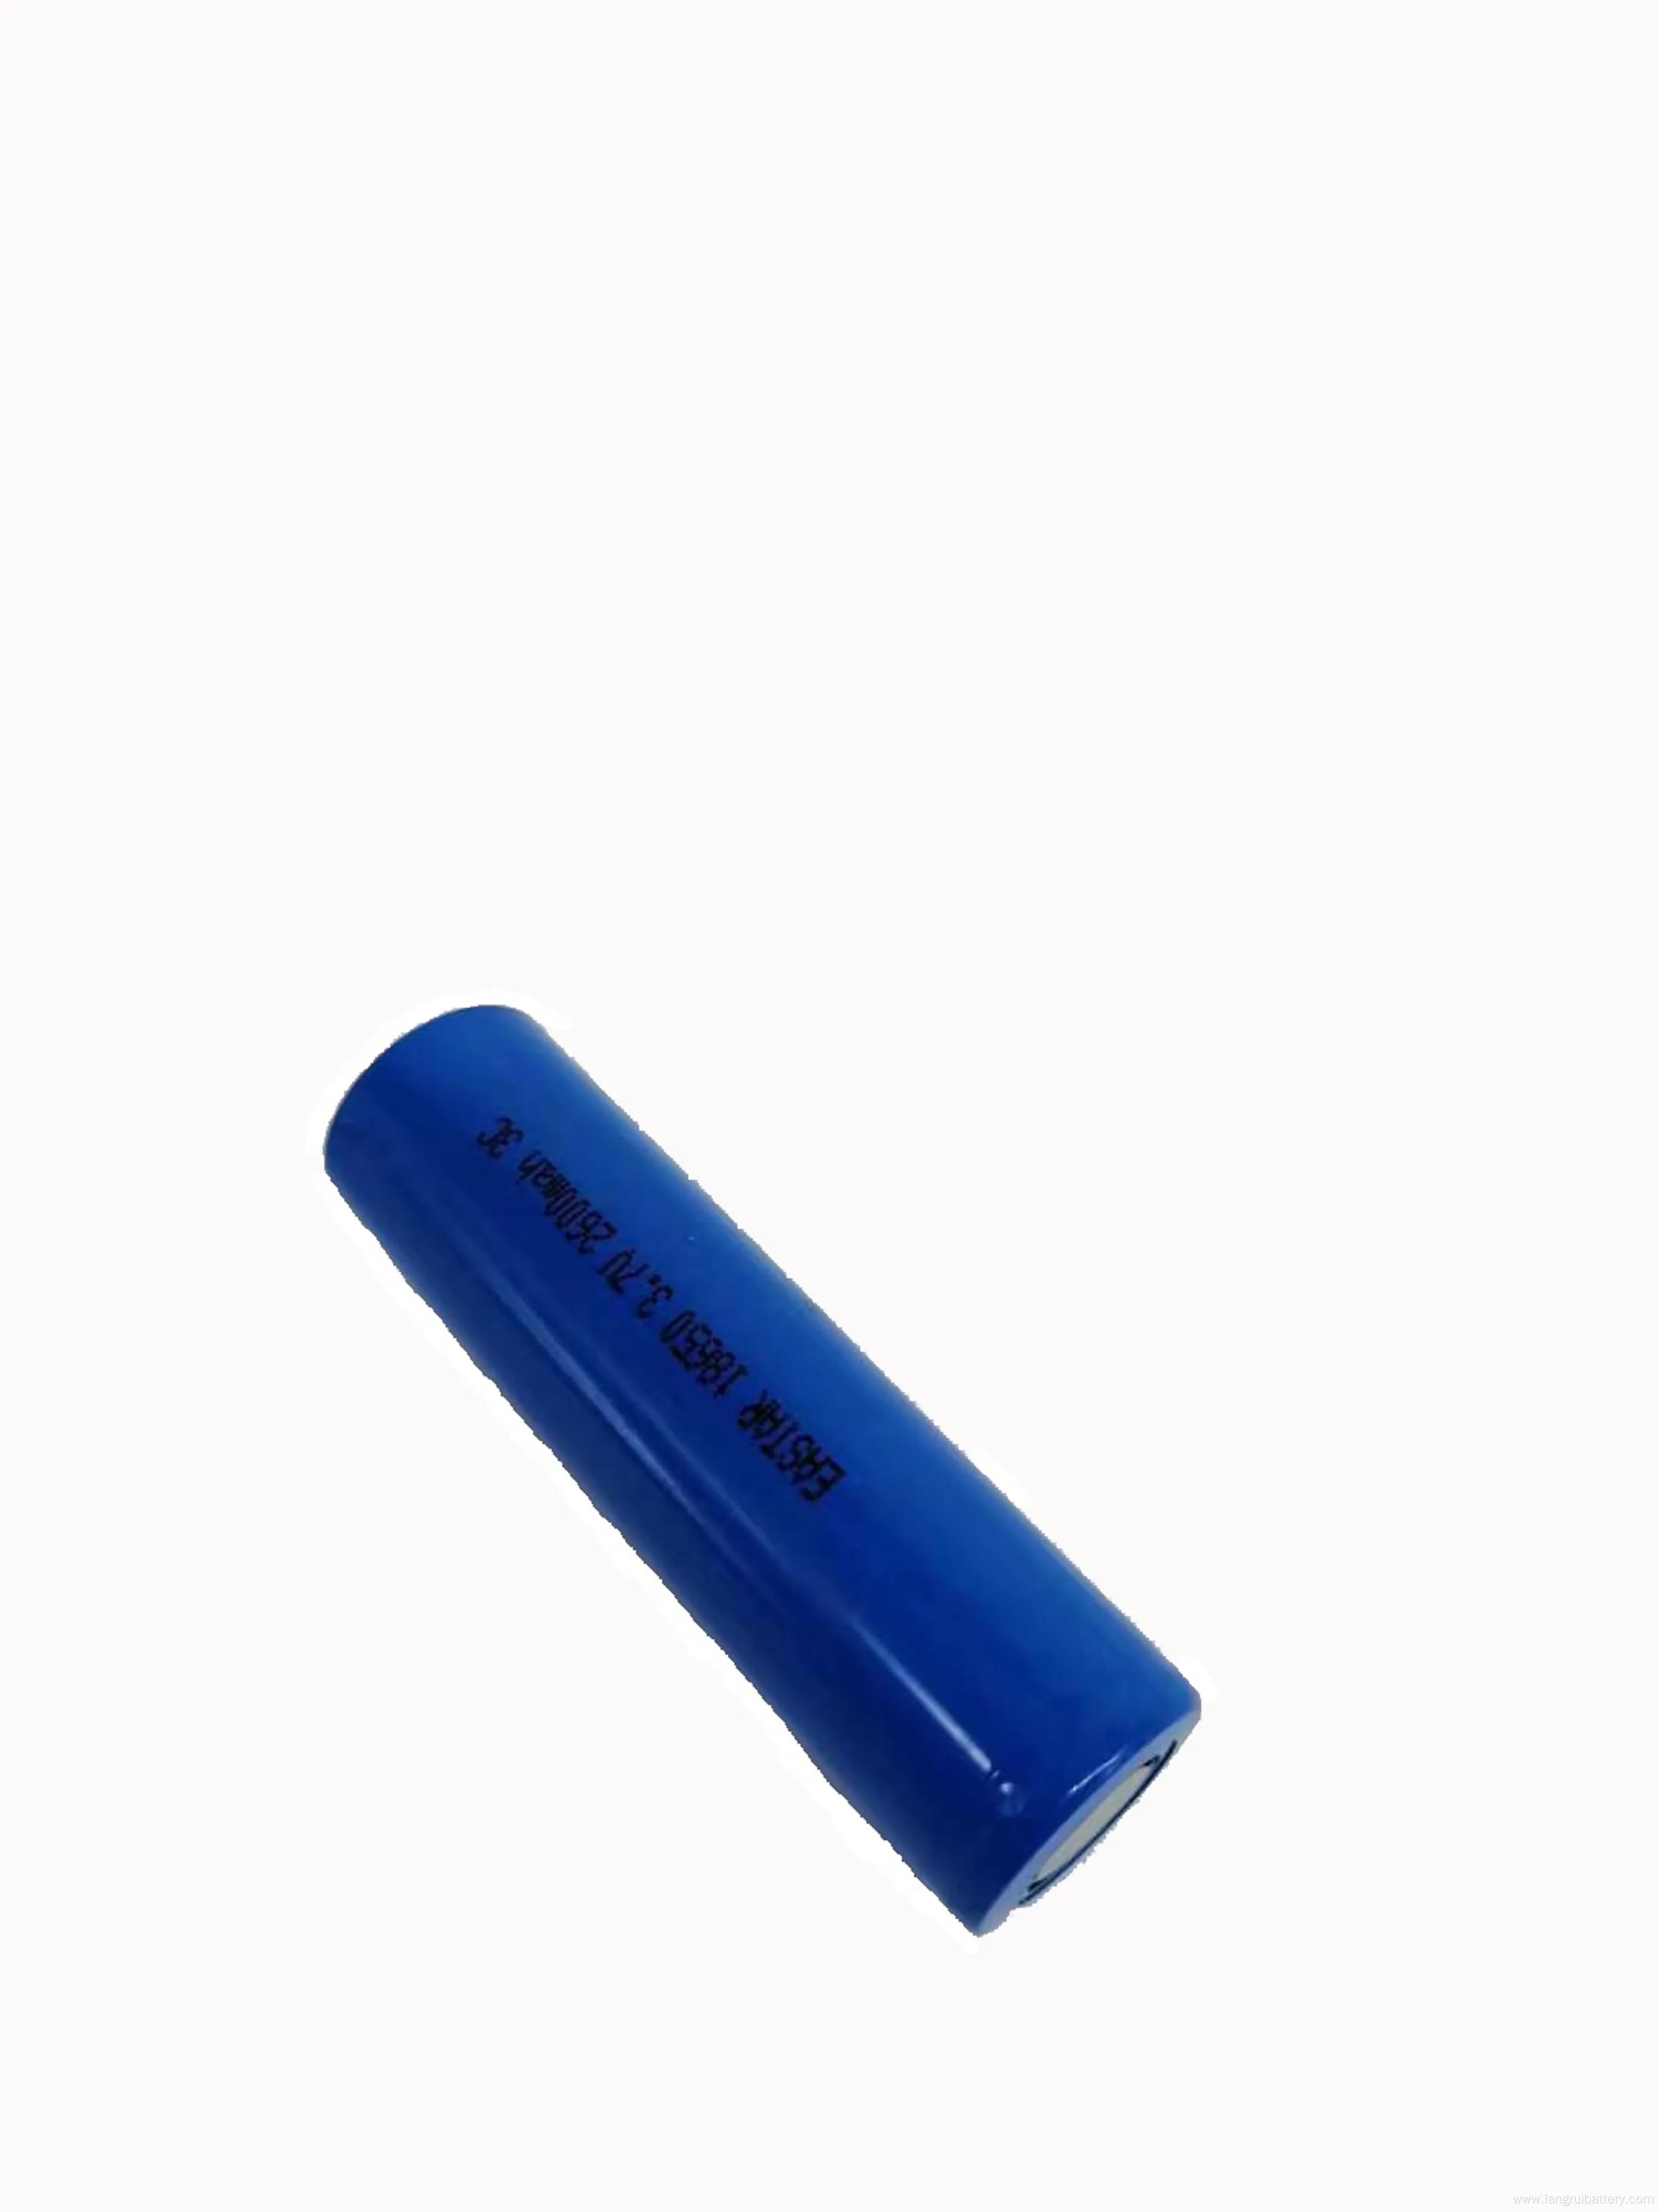 Good Quality Reachargeable 6V 1500 mAh Battery